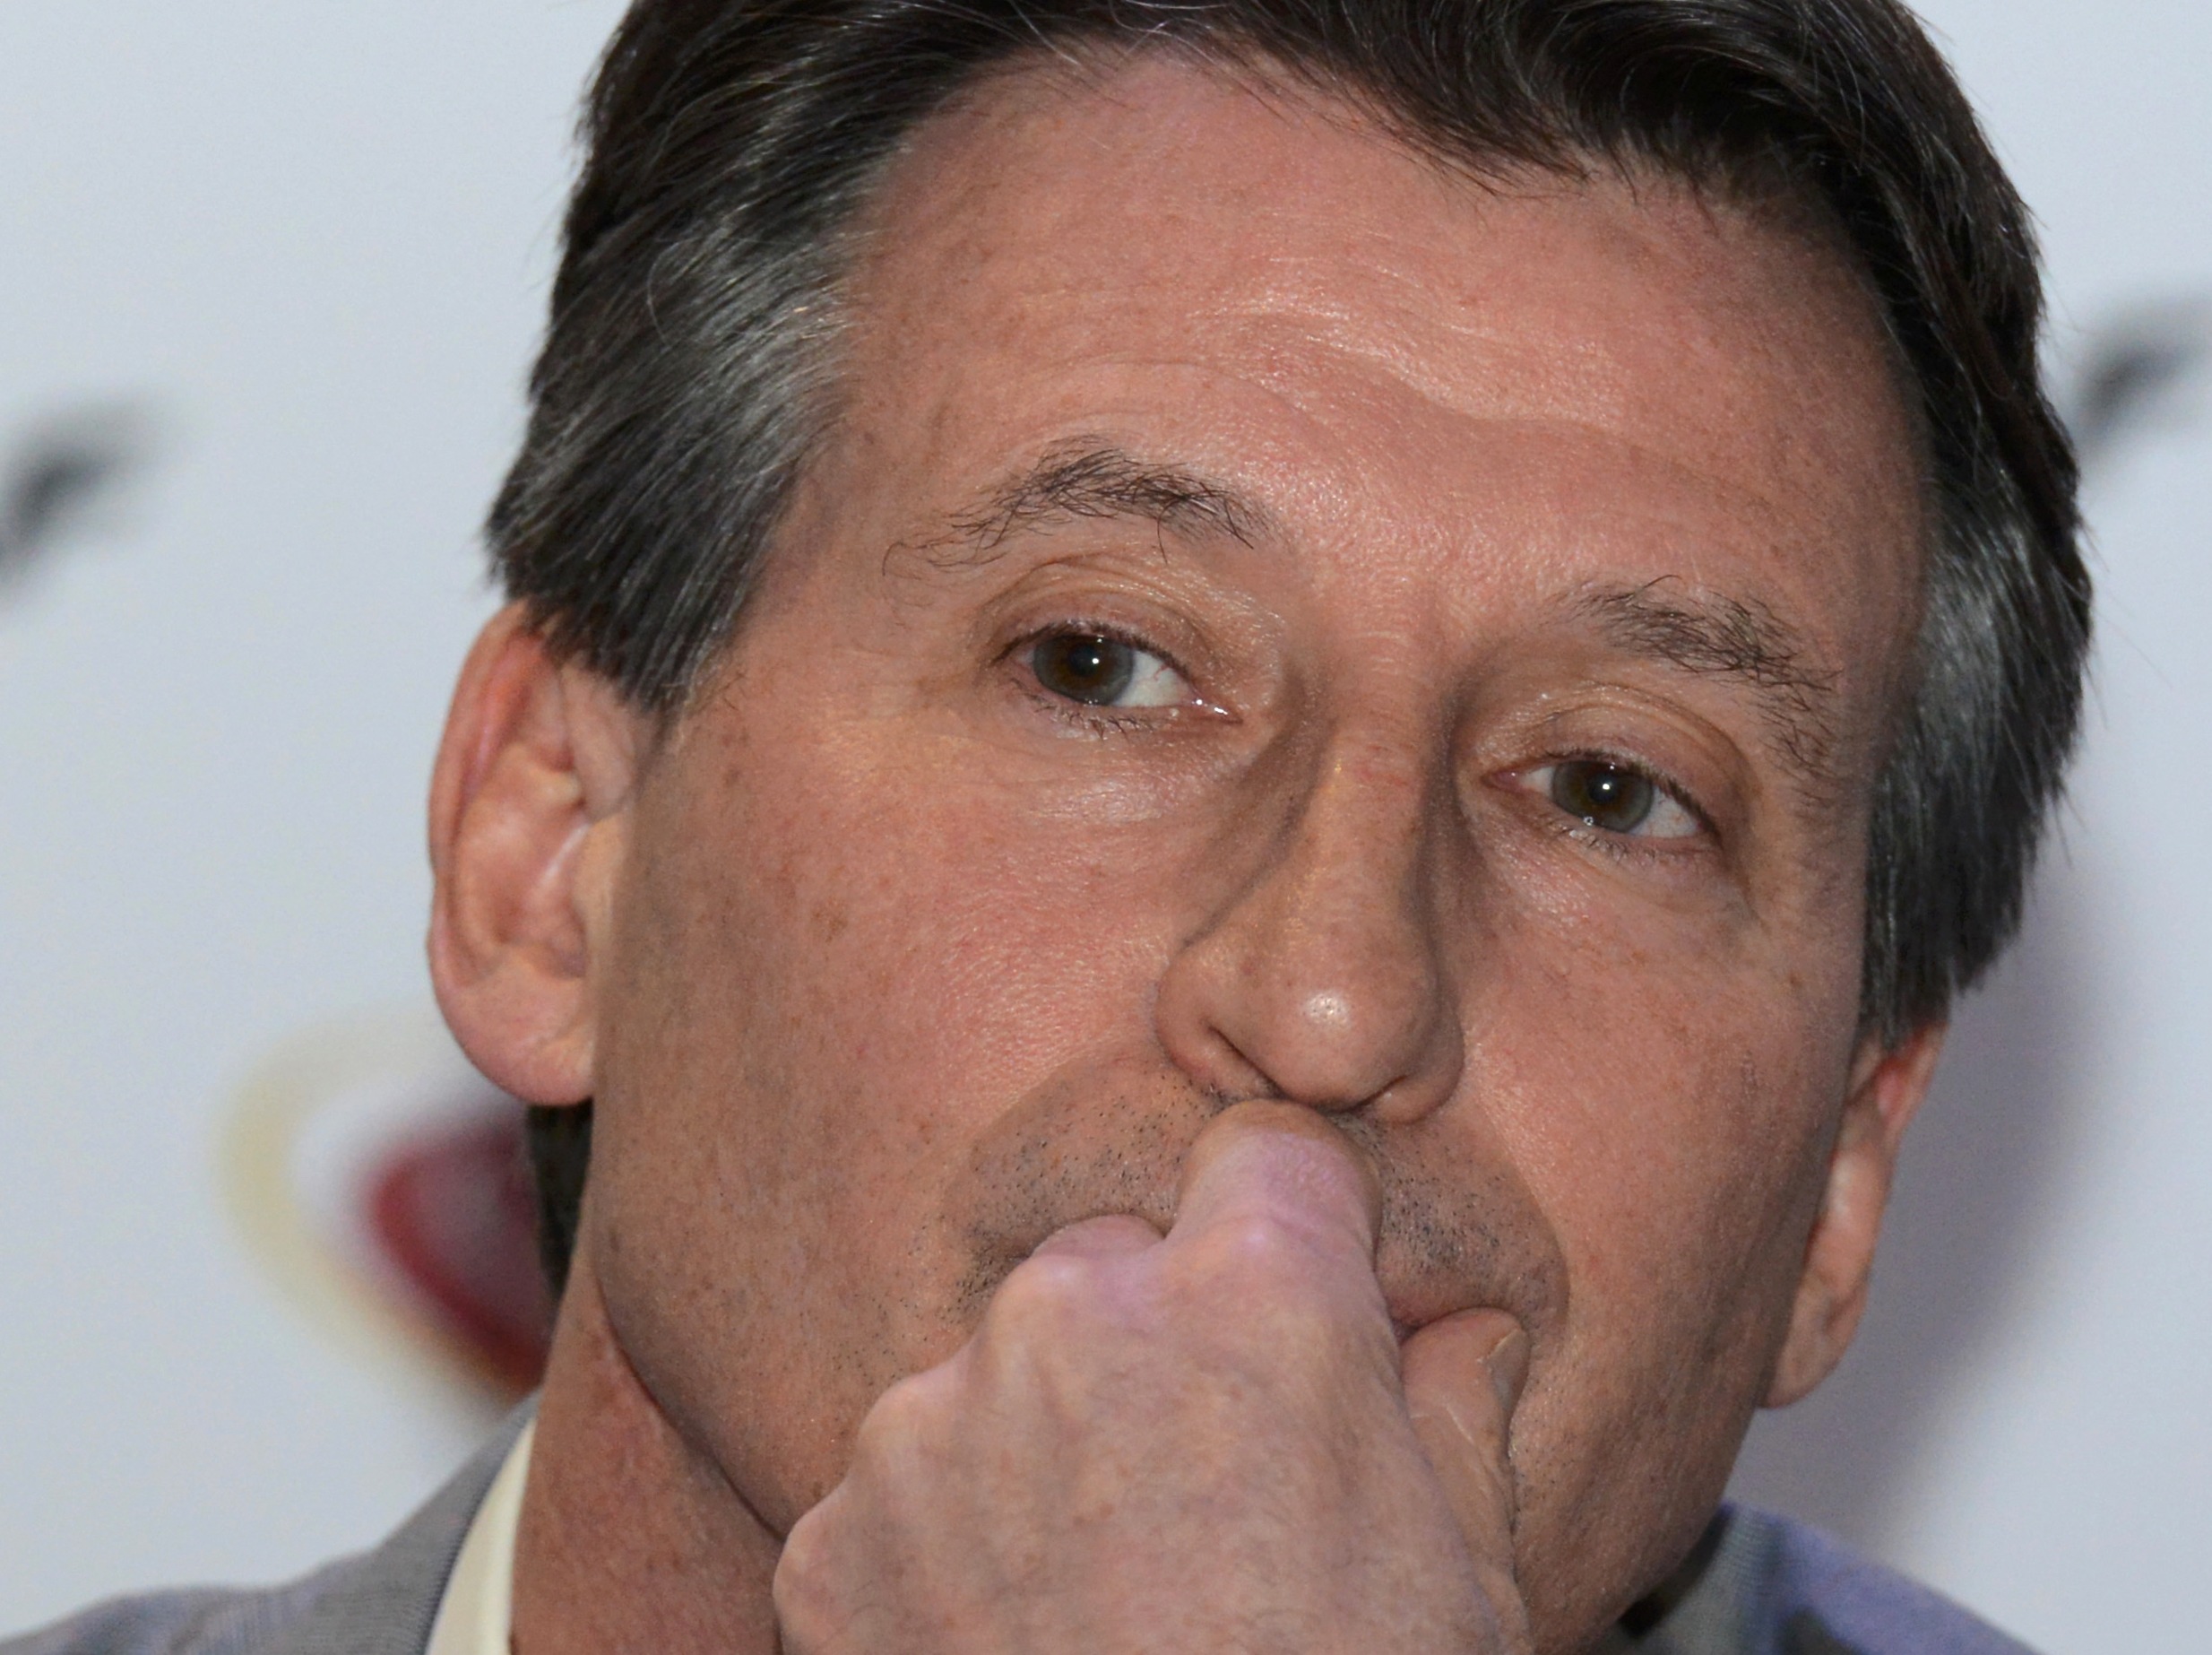 Sebastian Coe, IAAF's President, attends the IAAF press conference in Monaco, November 26, 2015. Coe, who leads the ruling body of world athletics, announced that he is stepping down from his paid ambassadorial role for the sportswear firm Nike, as he faced repeated questions about a potential conflict of interest. REUTERS/Jean-Pierre Amet